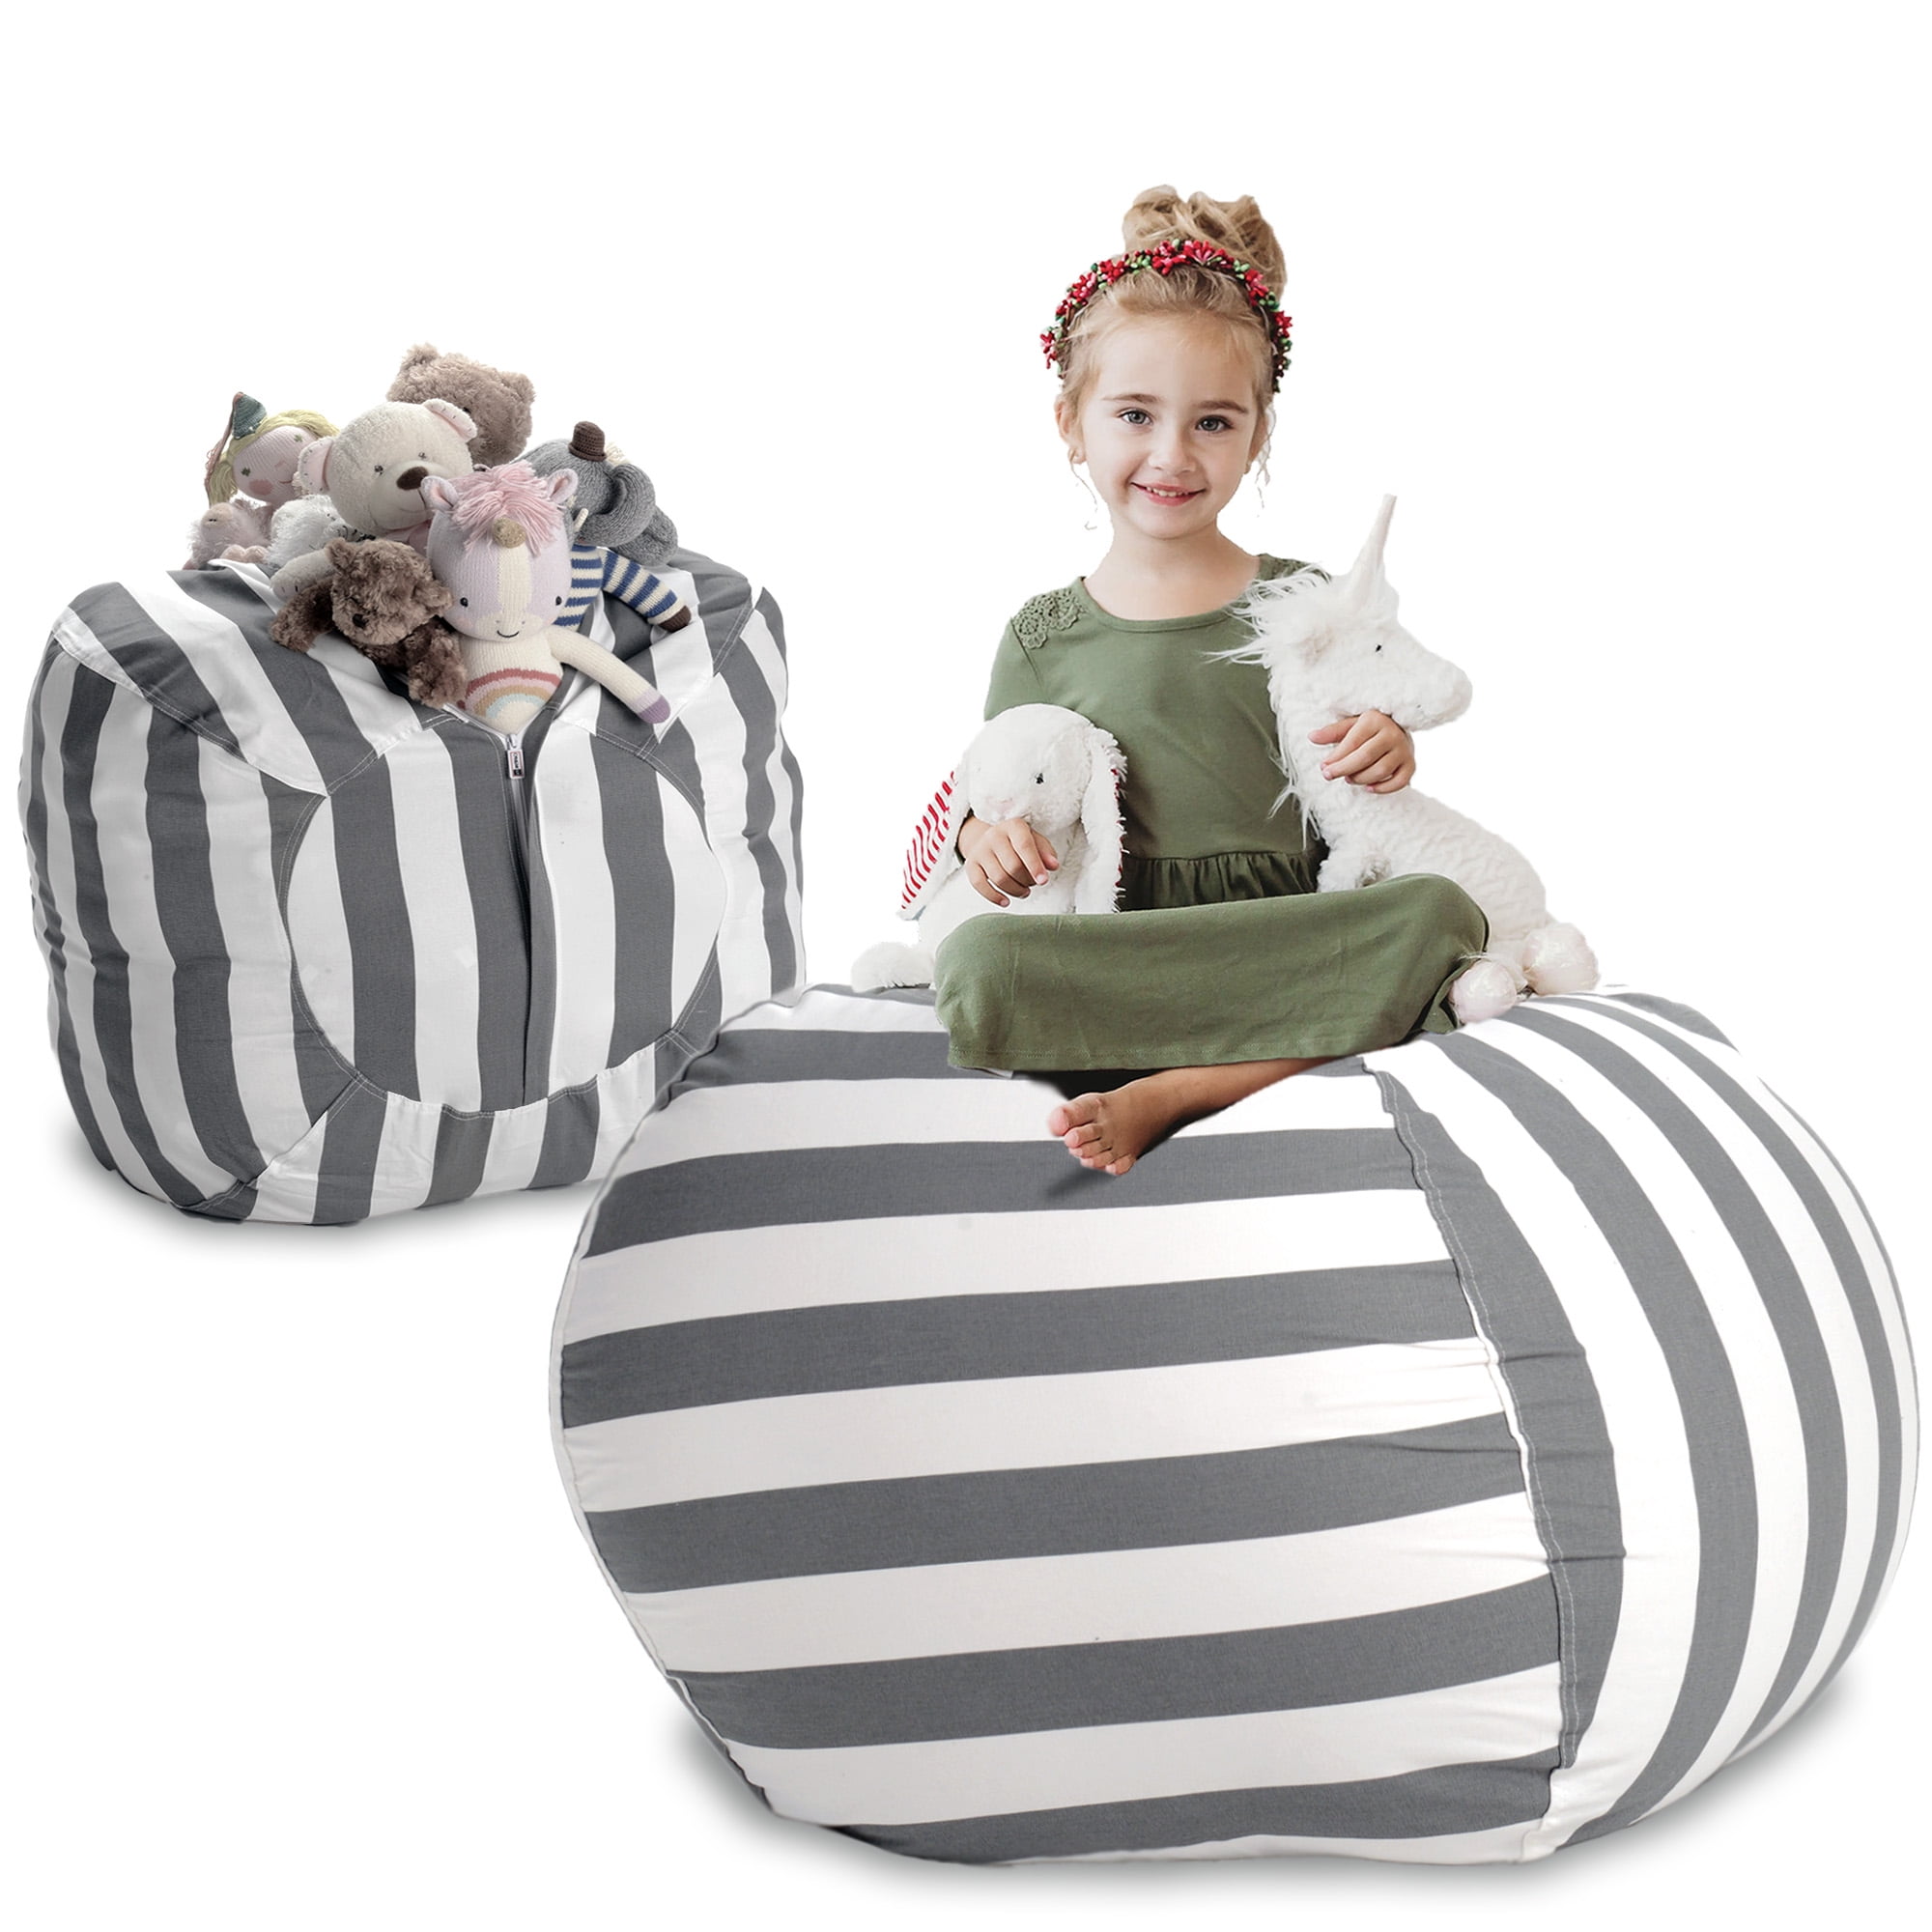 Details about   Kid's Stuffed Animal Storage Bean Bag Chair Extra Long Zipper Carrying Handle 